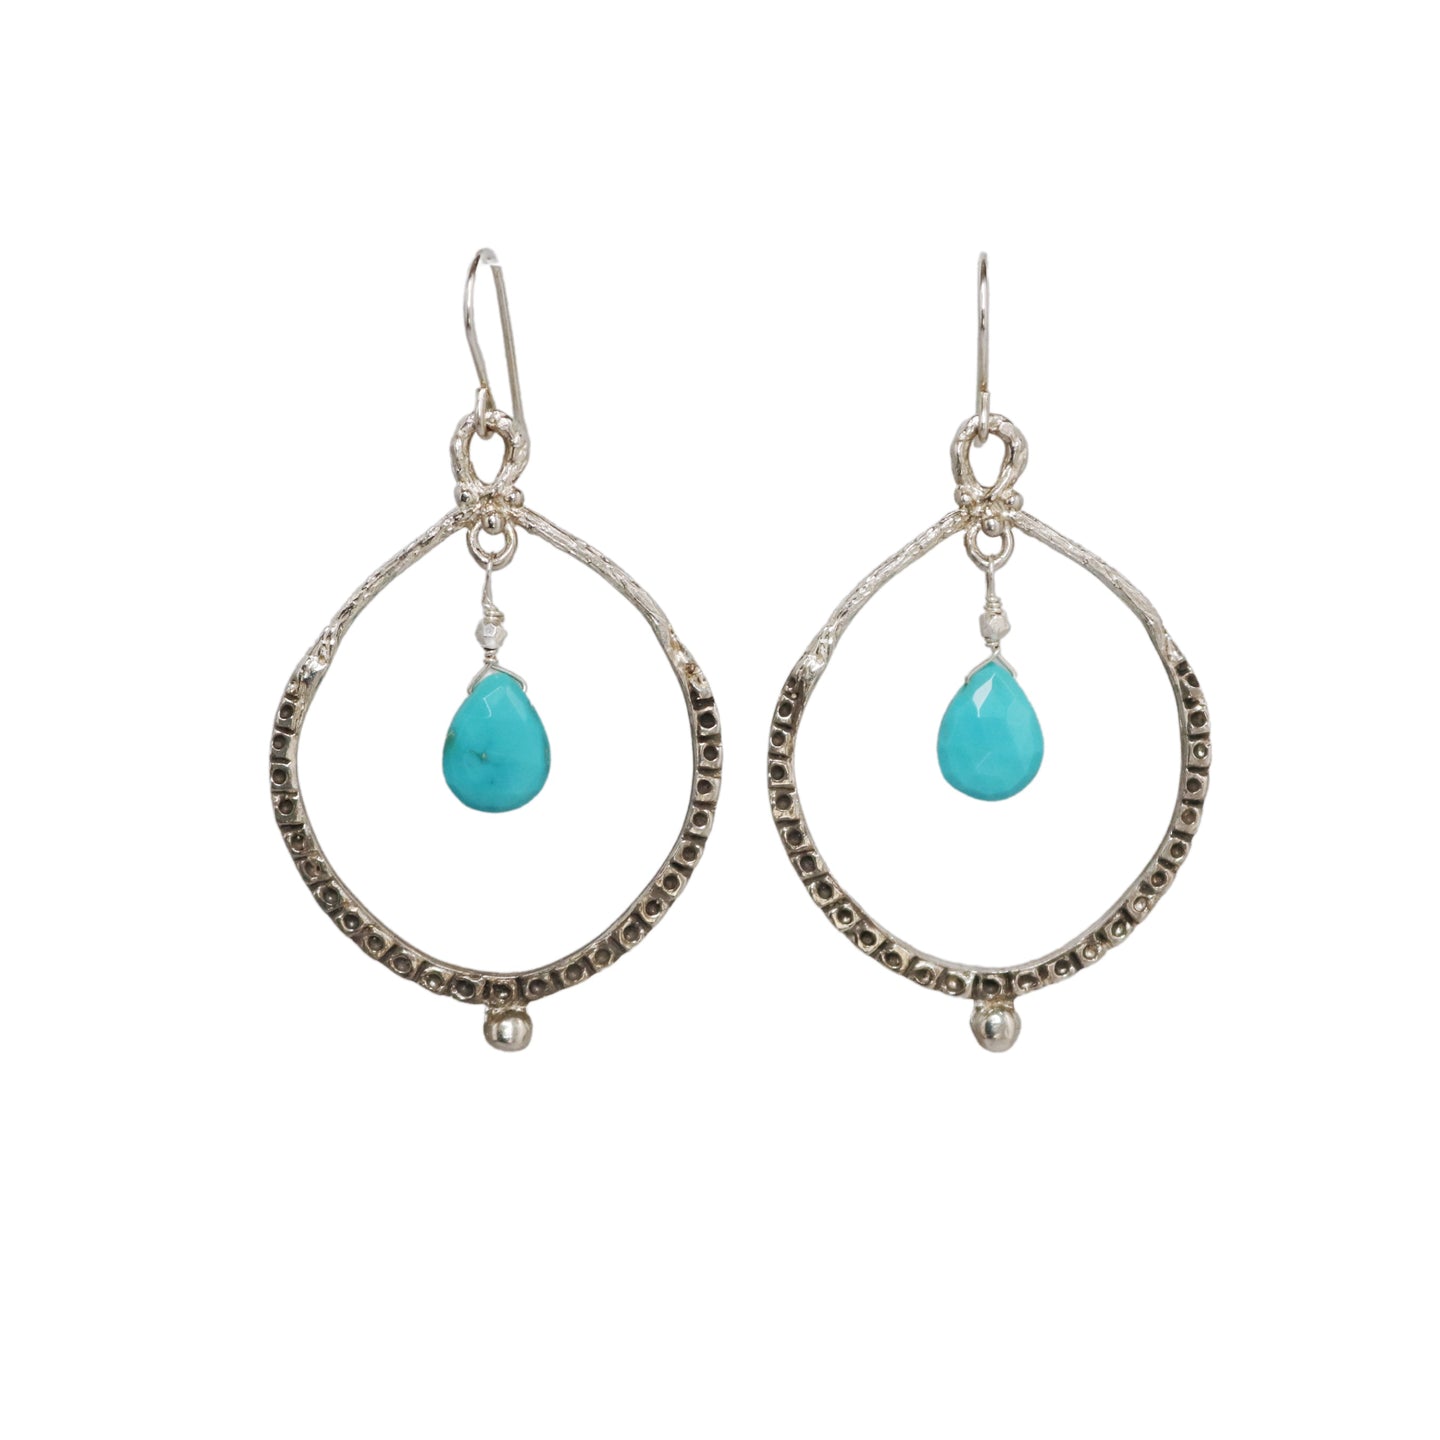 Empress Hoop Earrings in Silver and Turquoise